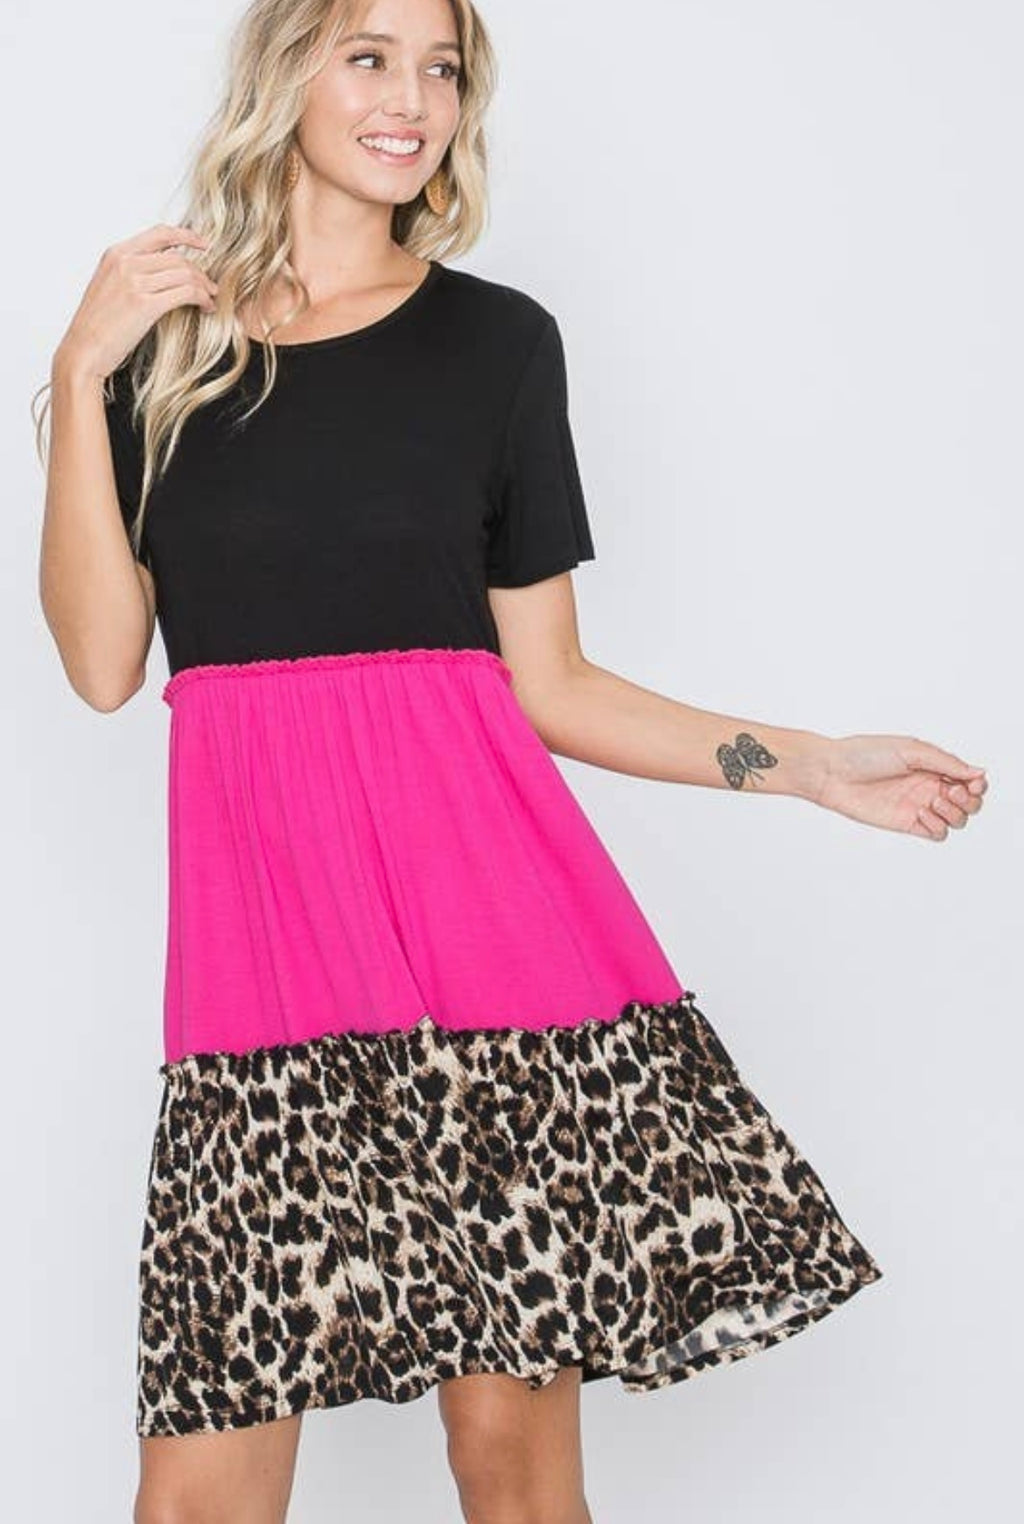 SHORT SLEEVE ROUND NECK SOLID AND ANIMAL LEOPARD PRINT CONTRAST DRESS WITH RUFFLED DETAIL - Lil Monkey Boutique